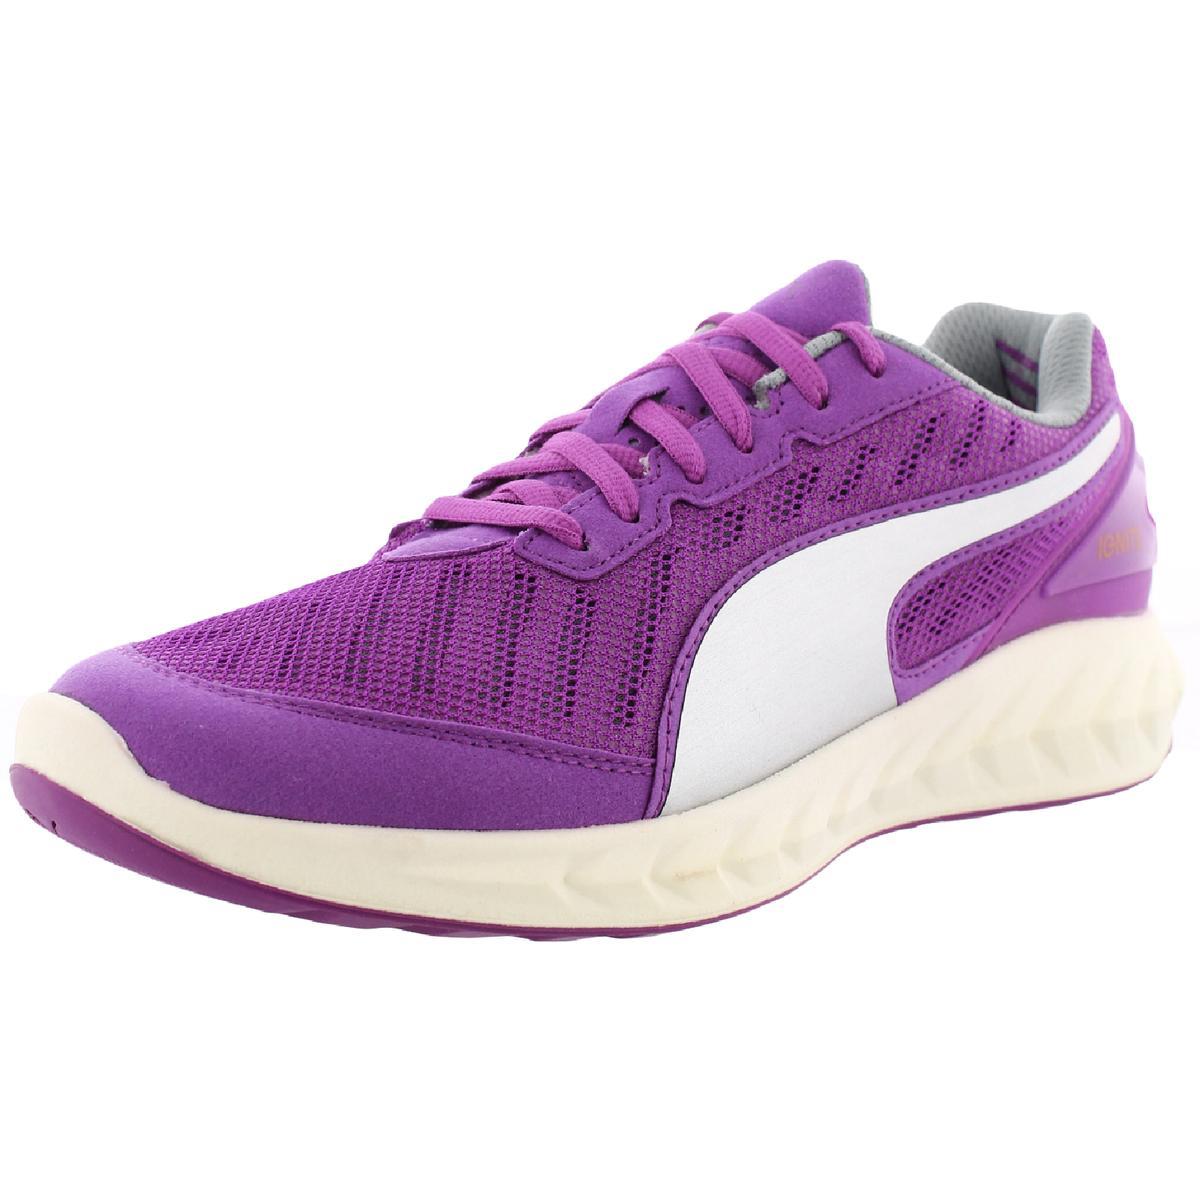 Puma Womens Ignite Ultimate Trainer Athletic and Training Shoes Shoes Bhfo 1175 Purple Cactus Flower-Zinnia